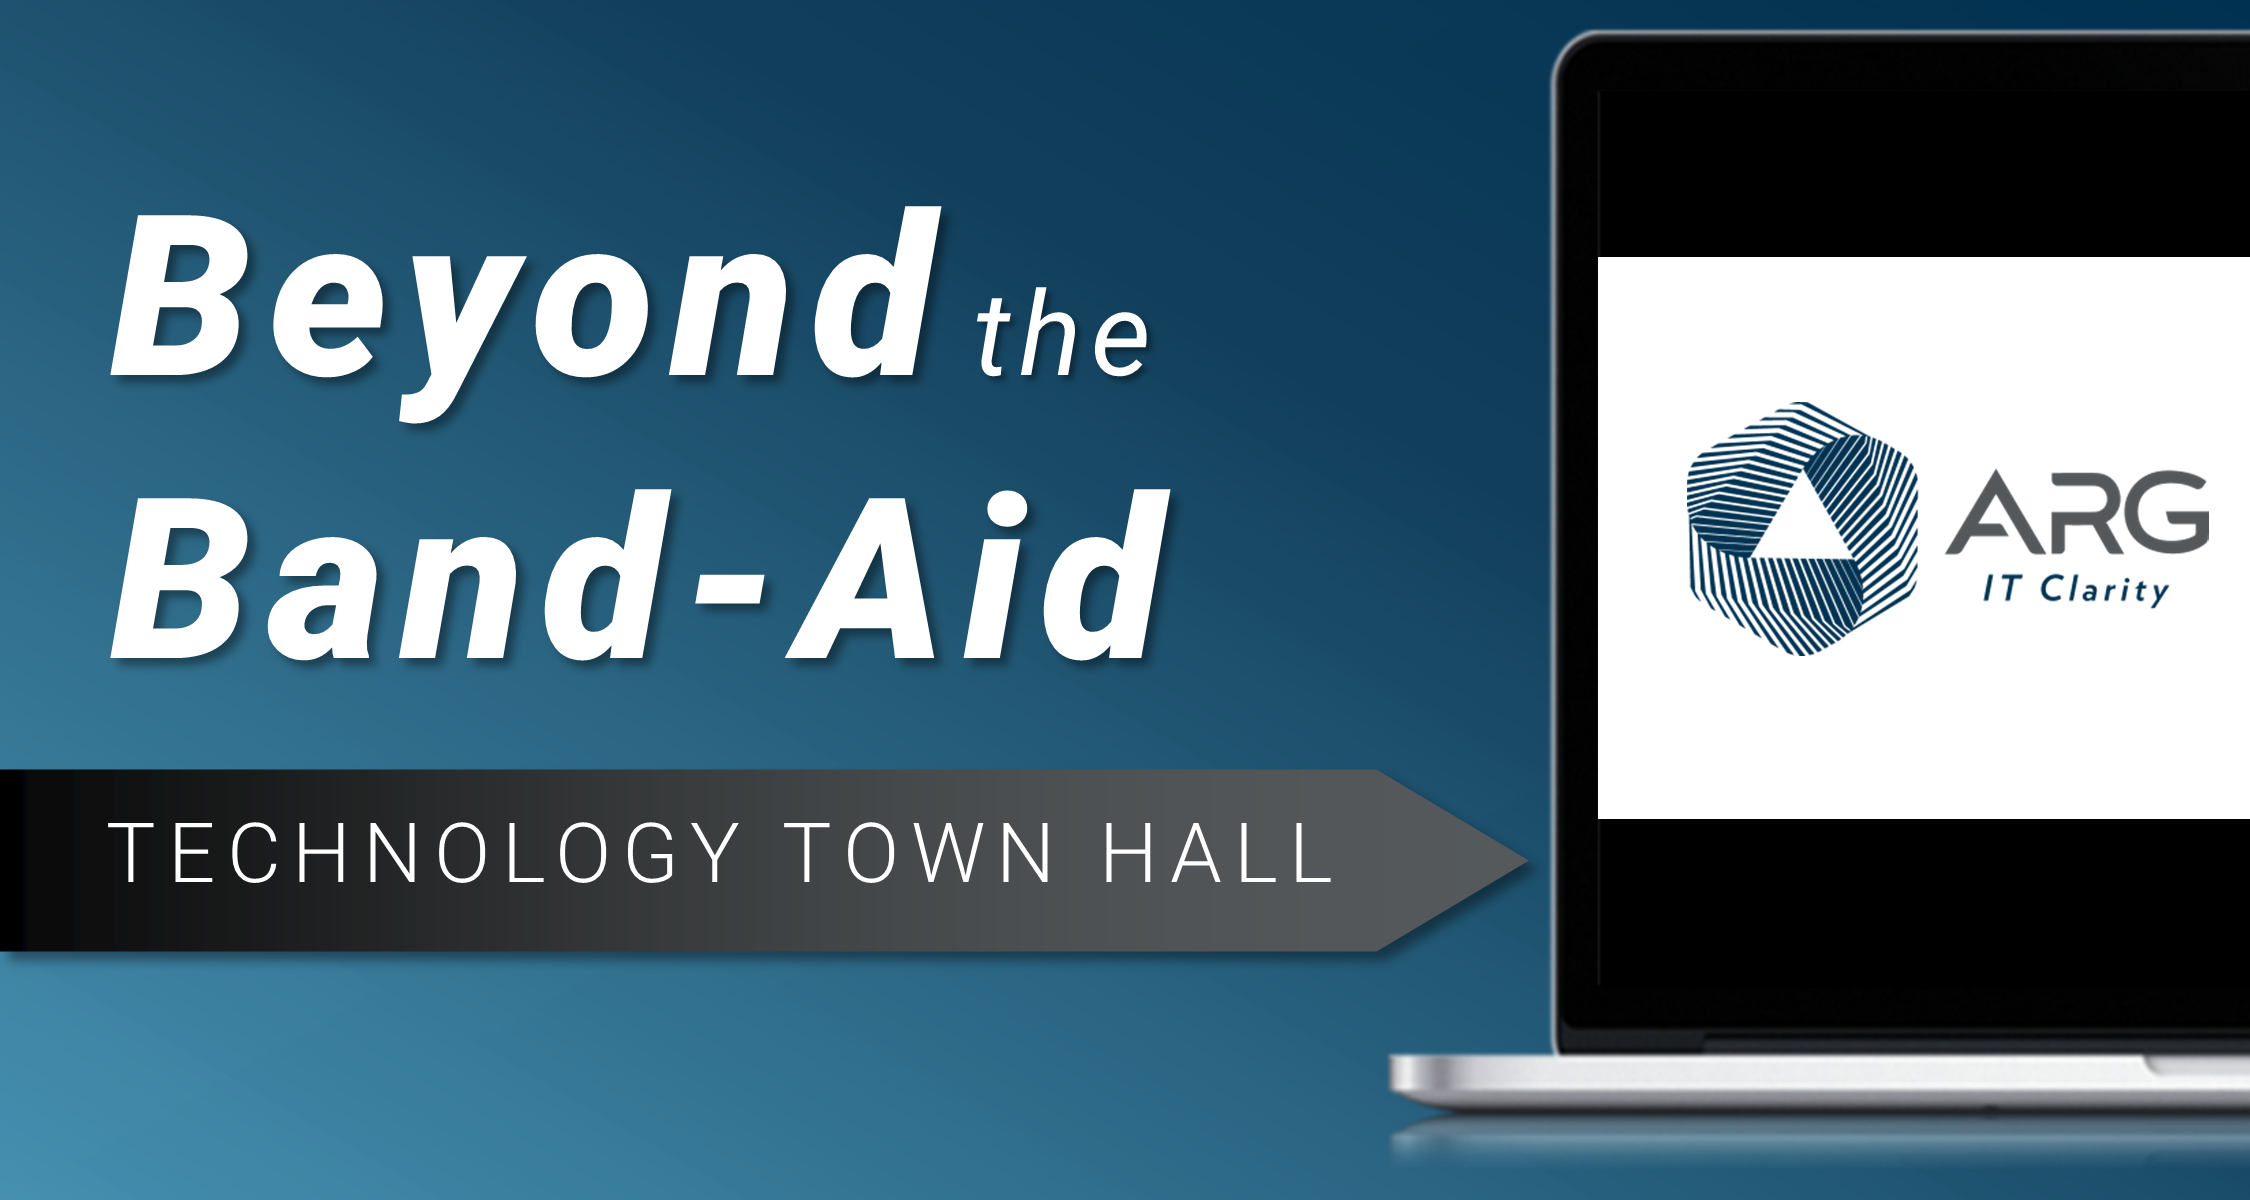 Technology Town Hall: Beyond the Band-Aid